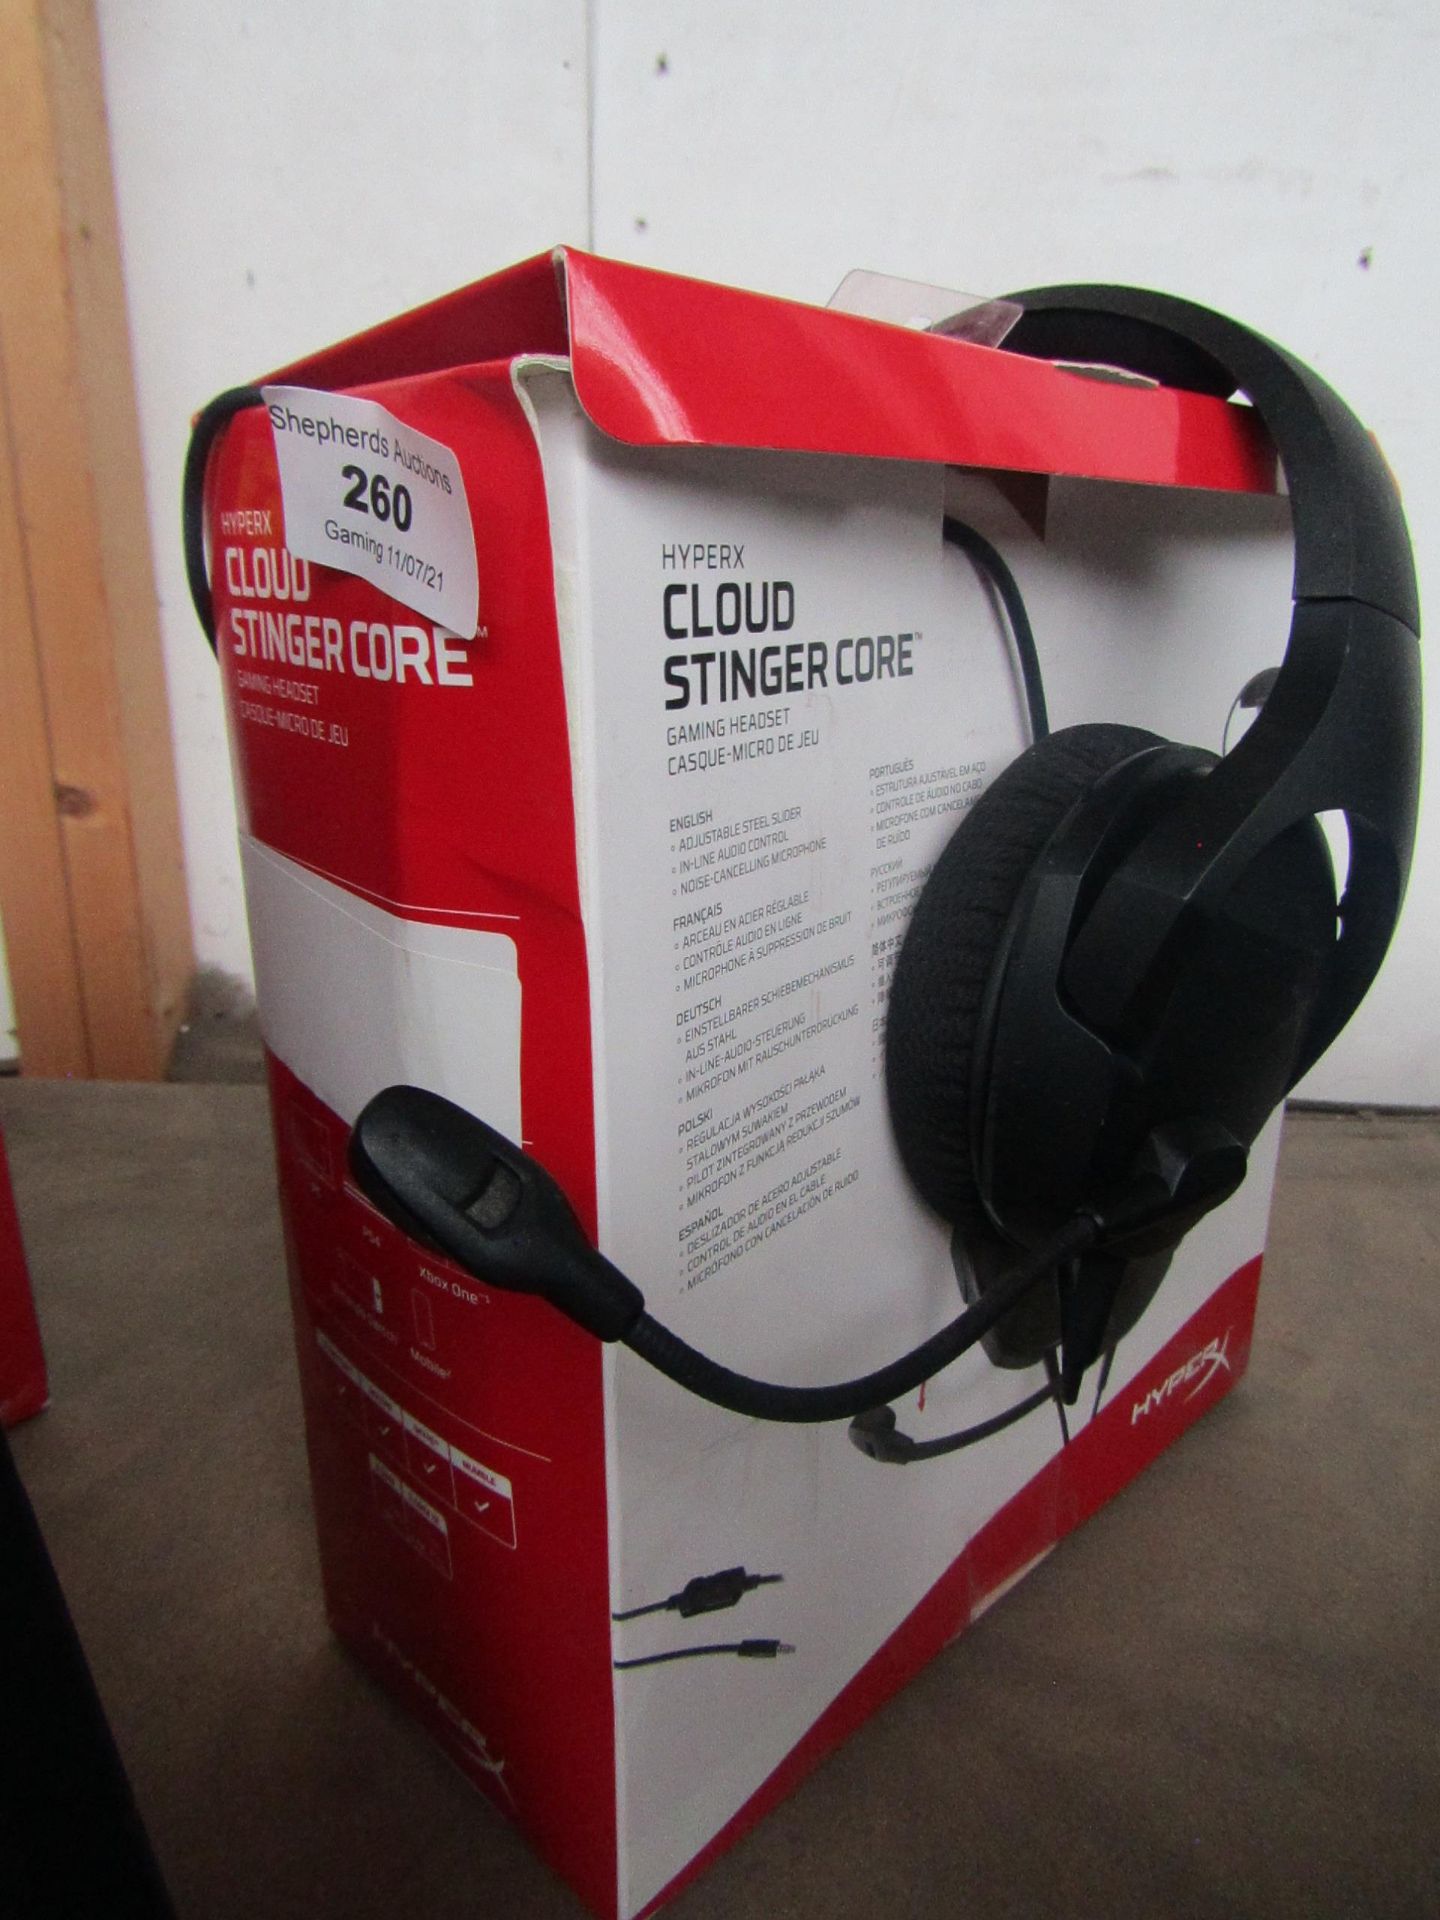 HyperX Cloud stinger Core Gaming headset, tested working for sound to the ears, boxed, RRP £29.99